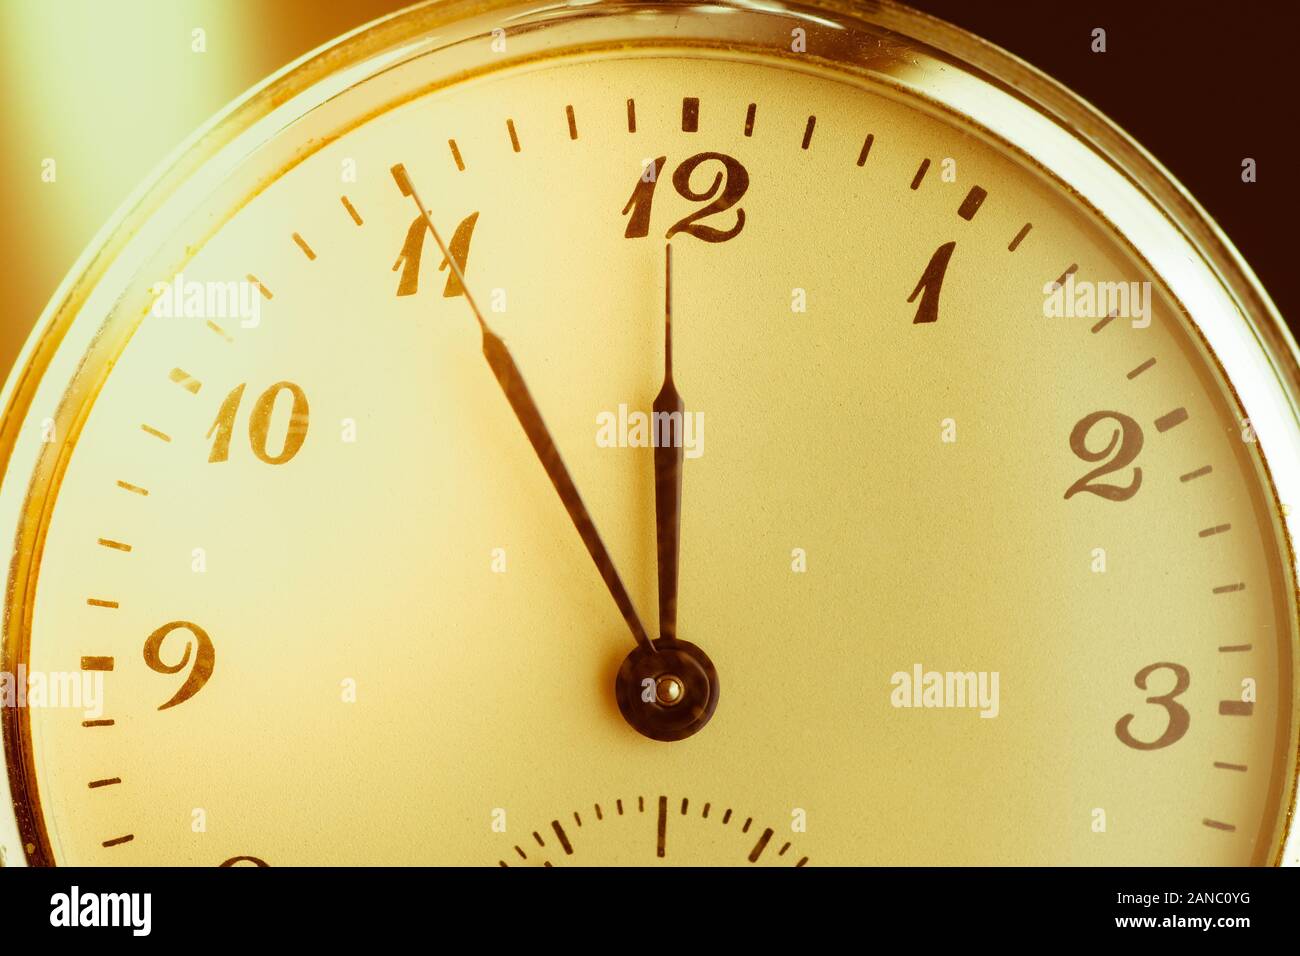 Time Passing Concept. Old Pocket Watch. Deadline, Running Out of Time and Urgency. Stock Photo